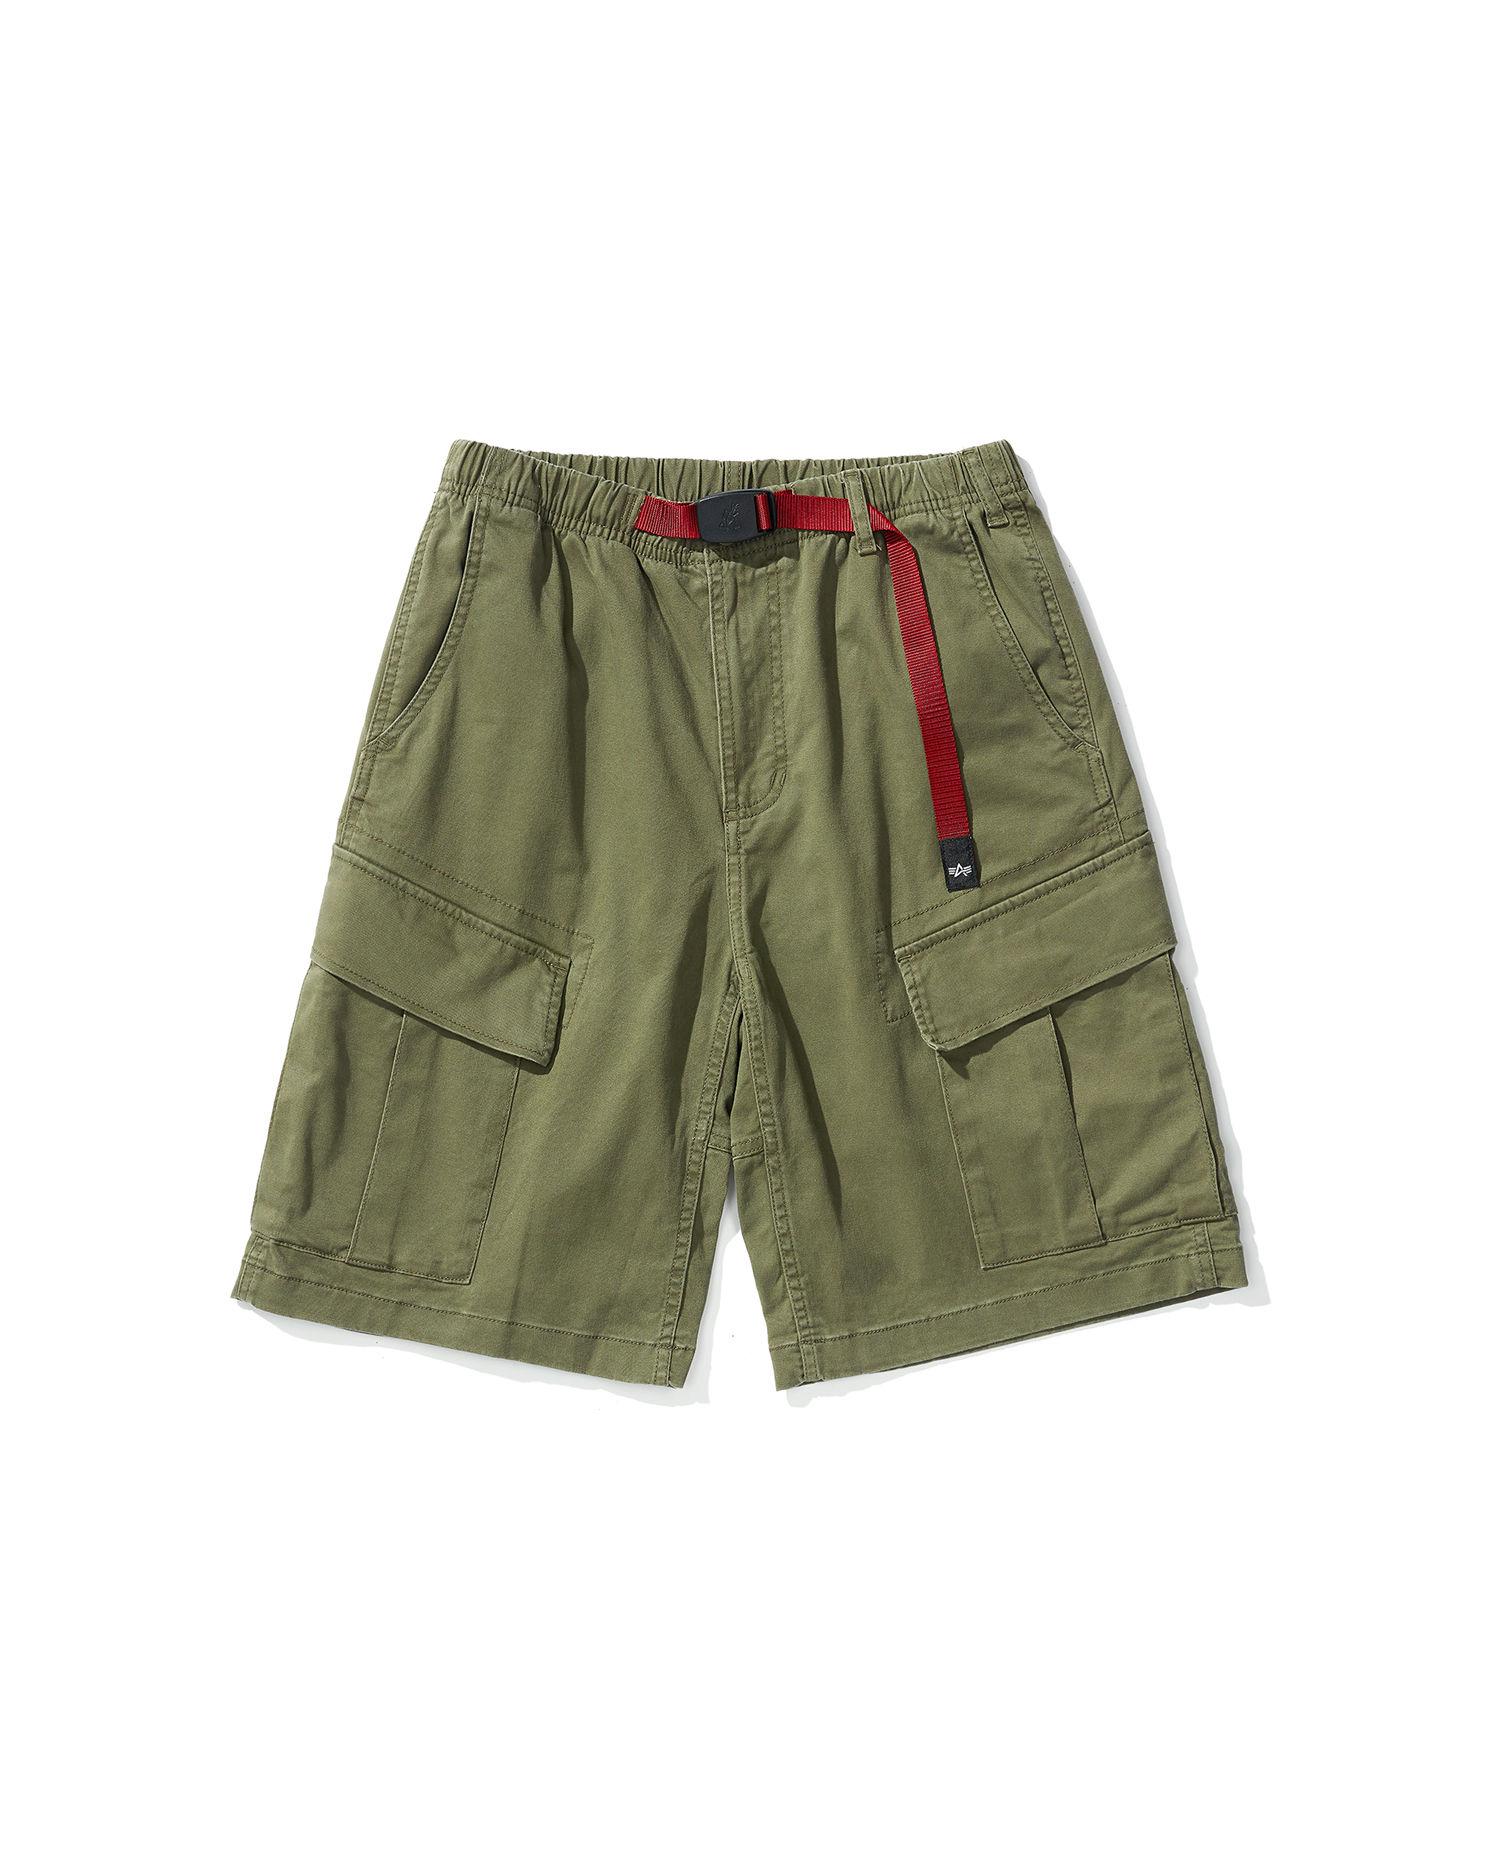 Jungle cargo shorts by ALPHA INDUSTRIES